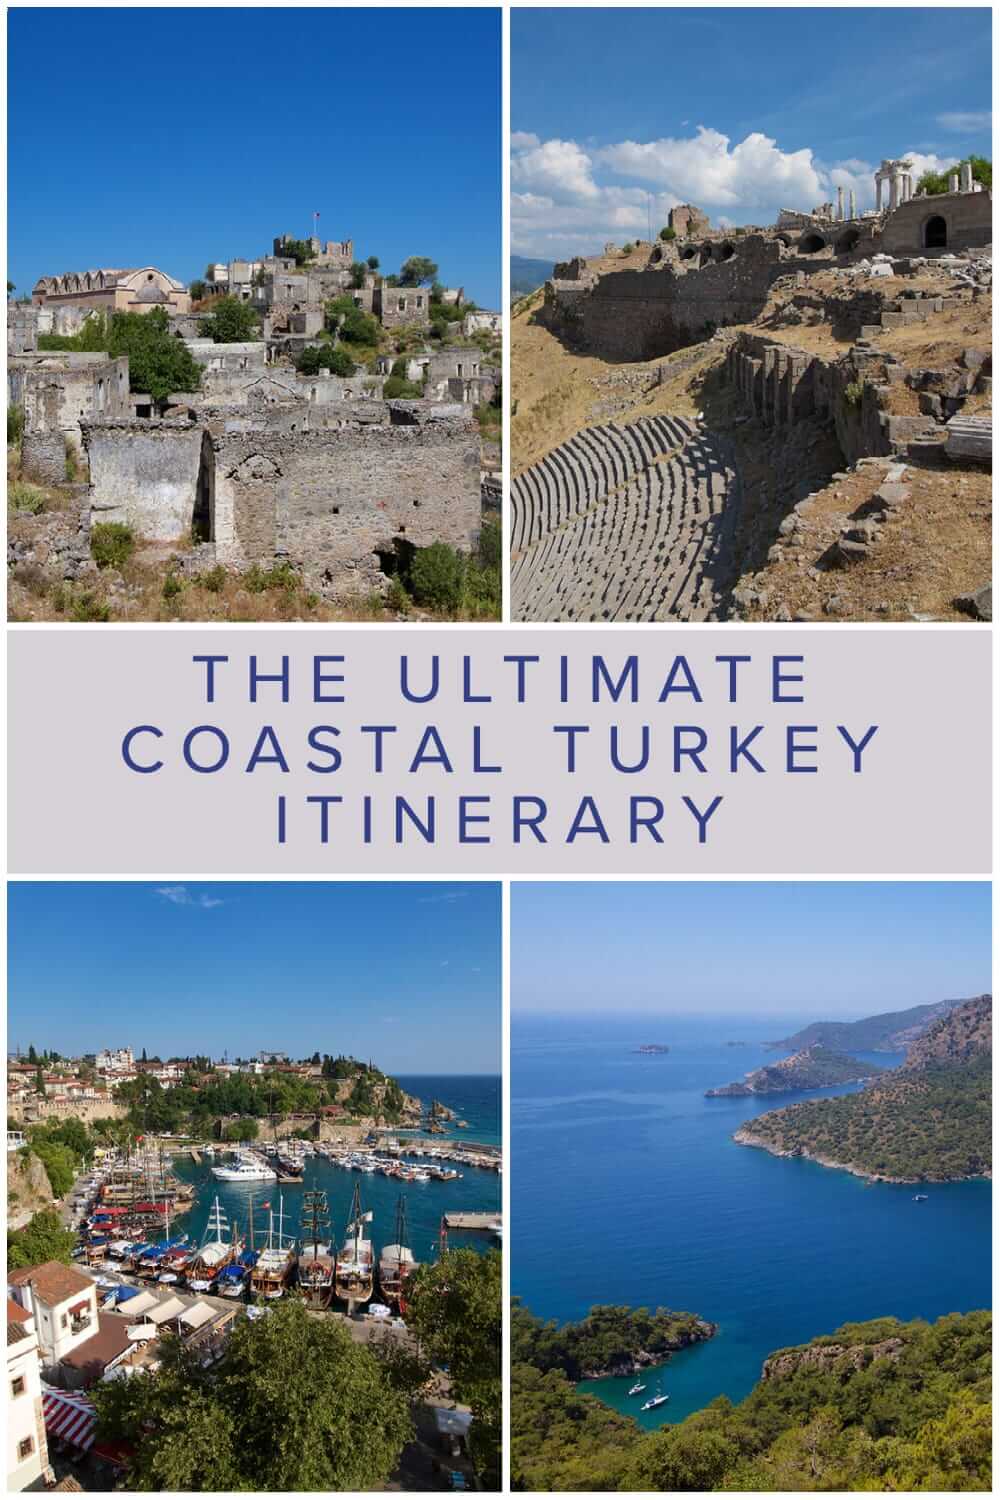 Coastal Turkey itinerary from Istanbul to Antalya along the Turquoise Coast for backpackers and independent travellers #travel #travelplanning #europe